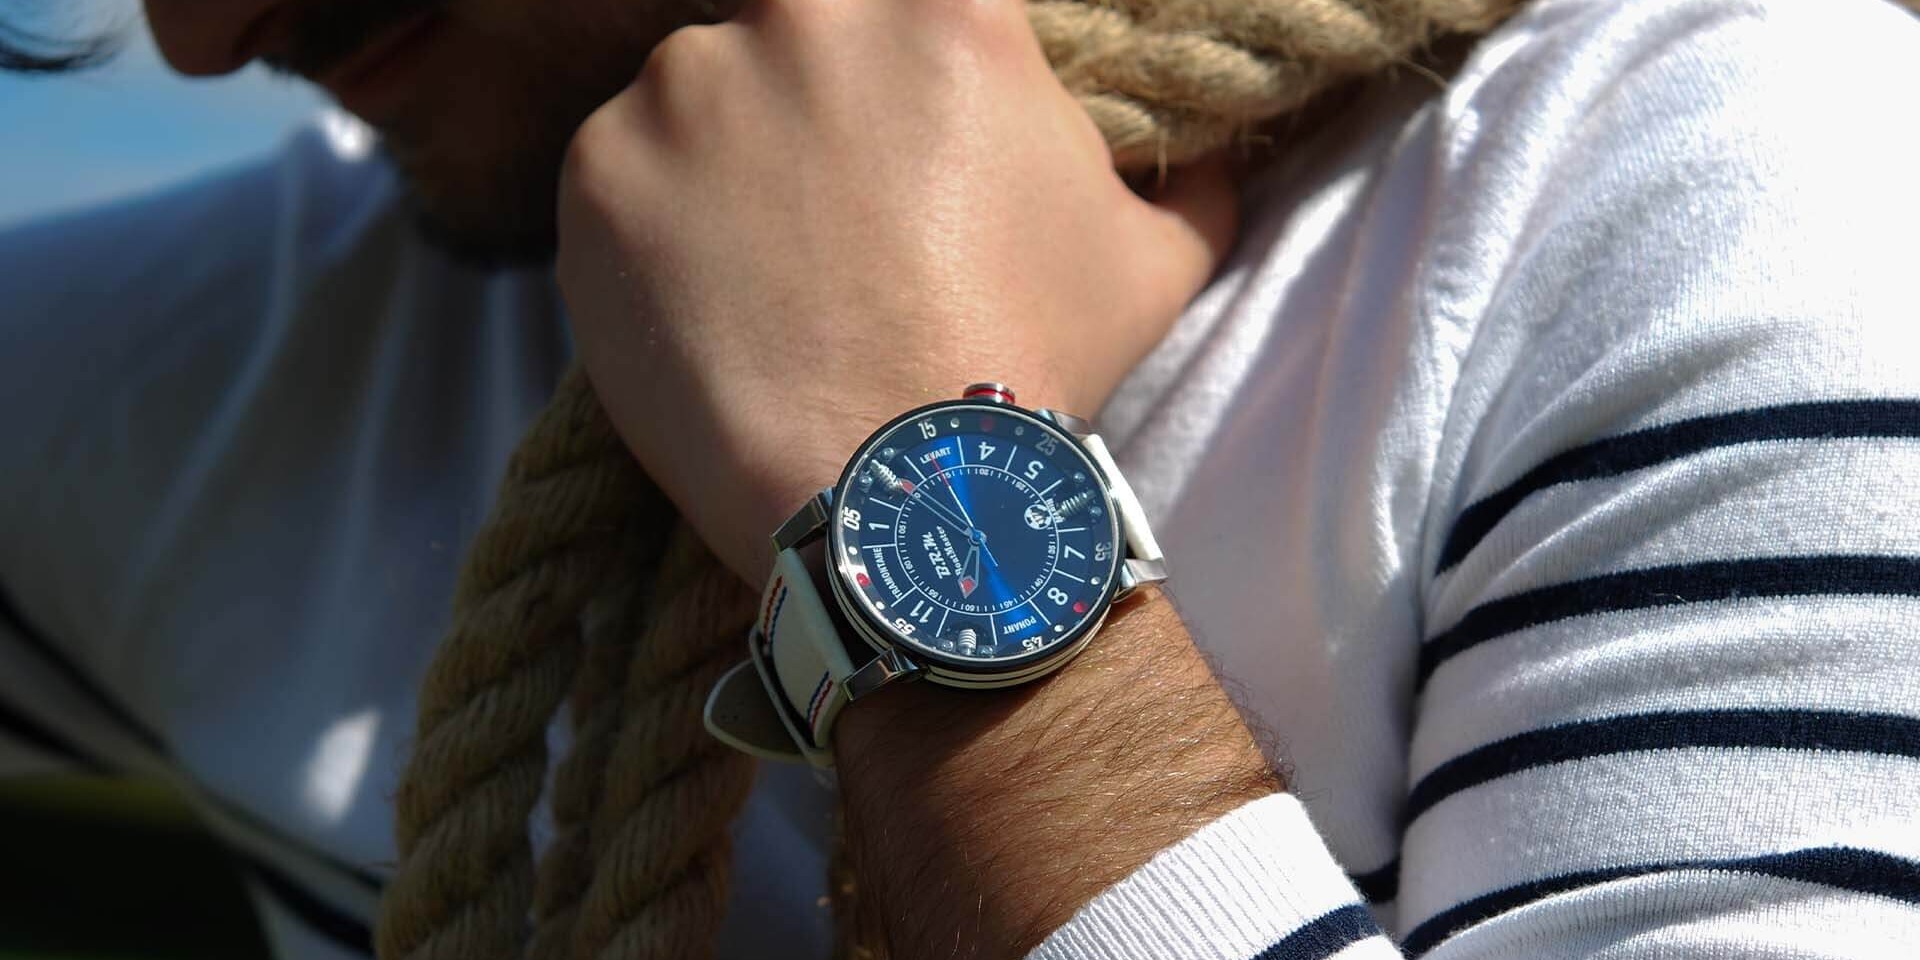 B.R.M Chronographes Sets Sail with the New Boat Master Collection